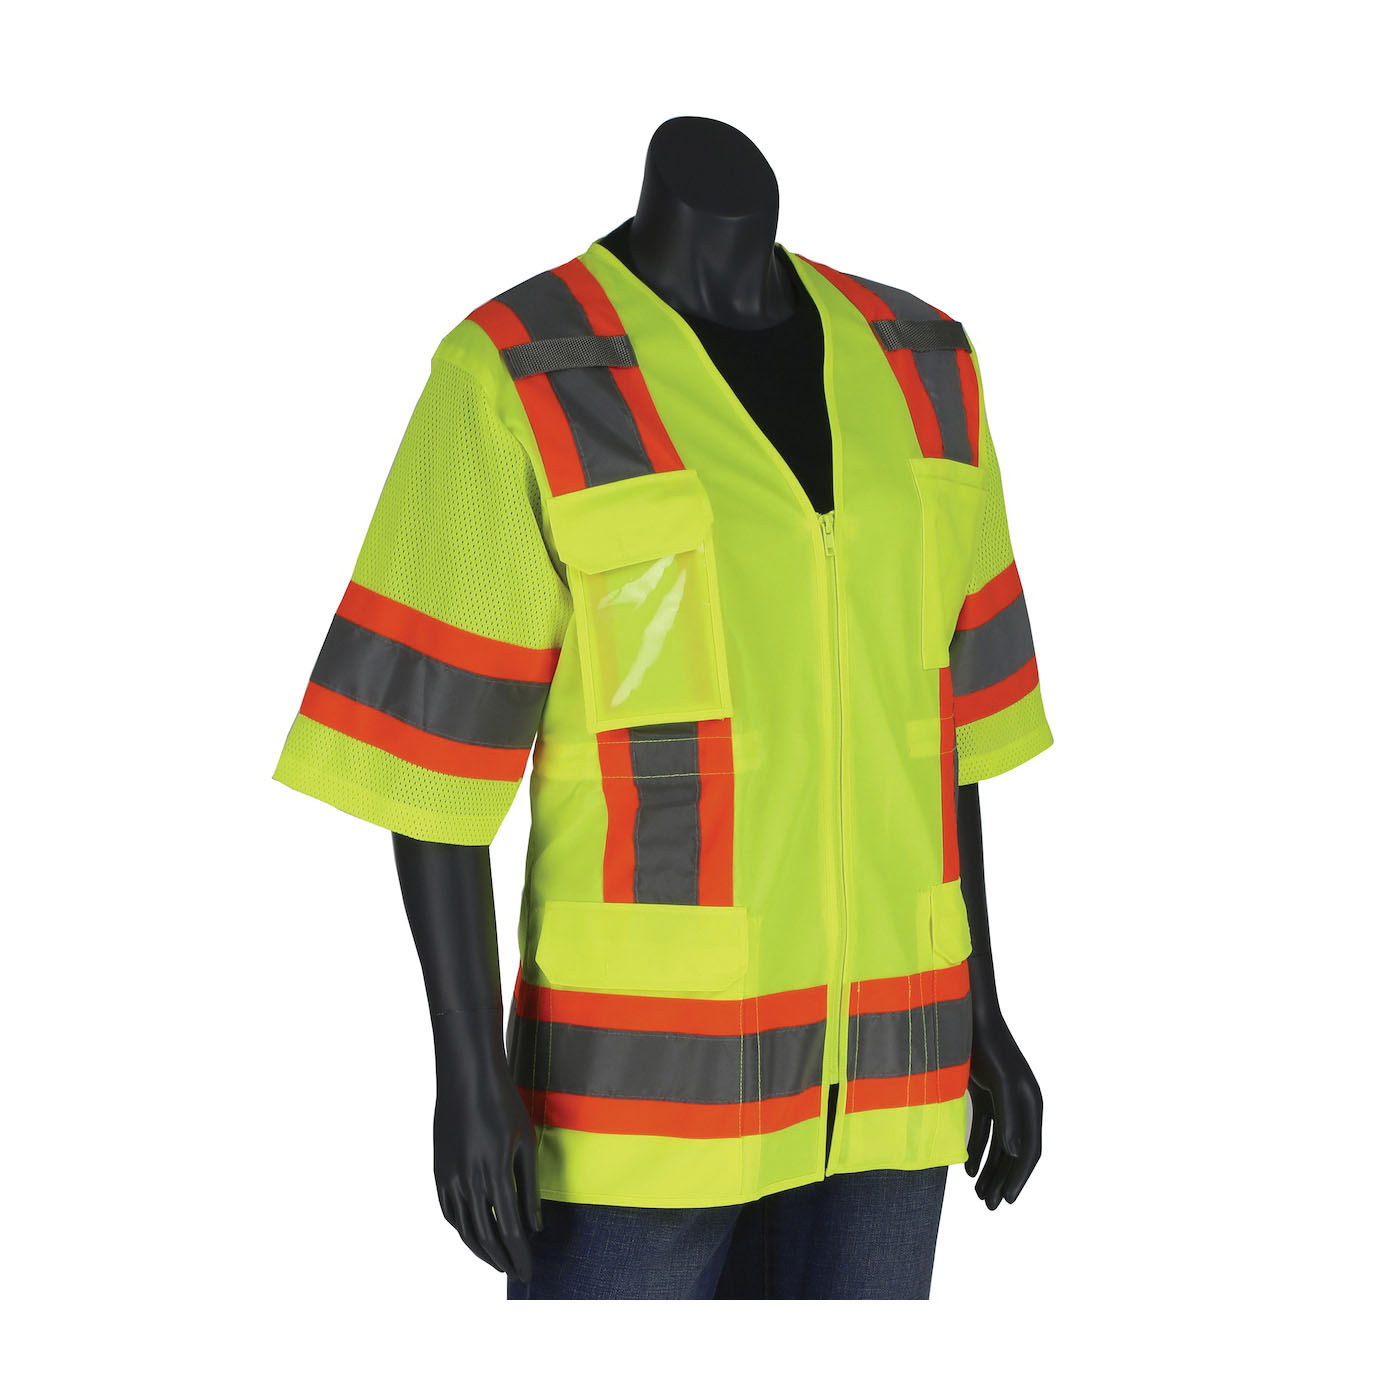 PIP® 303-0513-LY/2X 2-Tone Contoured Surveyor's Vest With Solid Front and Mesh Back, 2XL, Hi-Vis Yellow, 100% Polyester Mesh/Solid Tricot Knit, Zipper Closure, 11 Pockets, ANSI Class: Type/Class R3